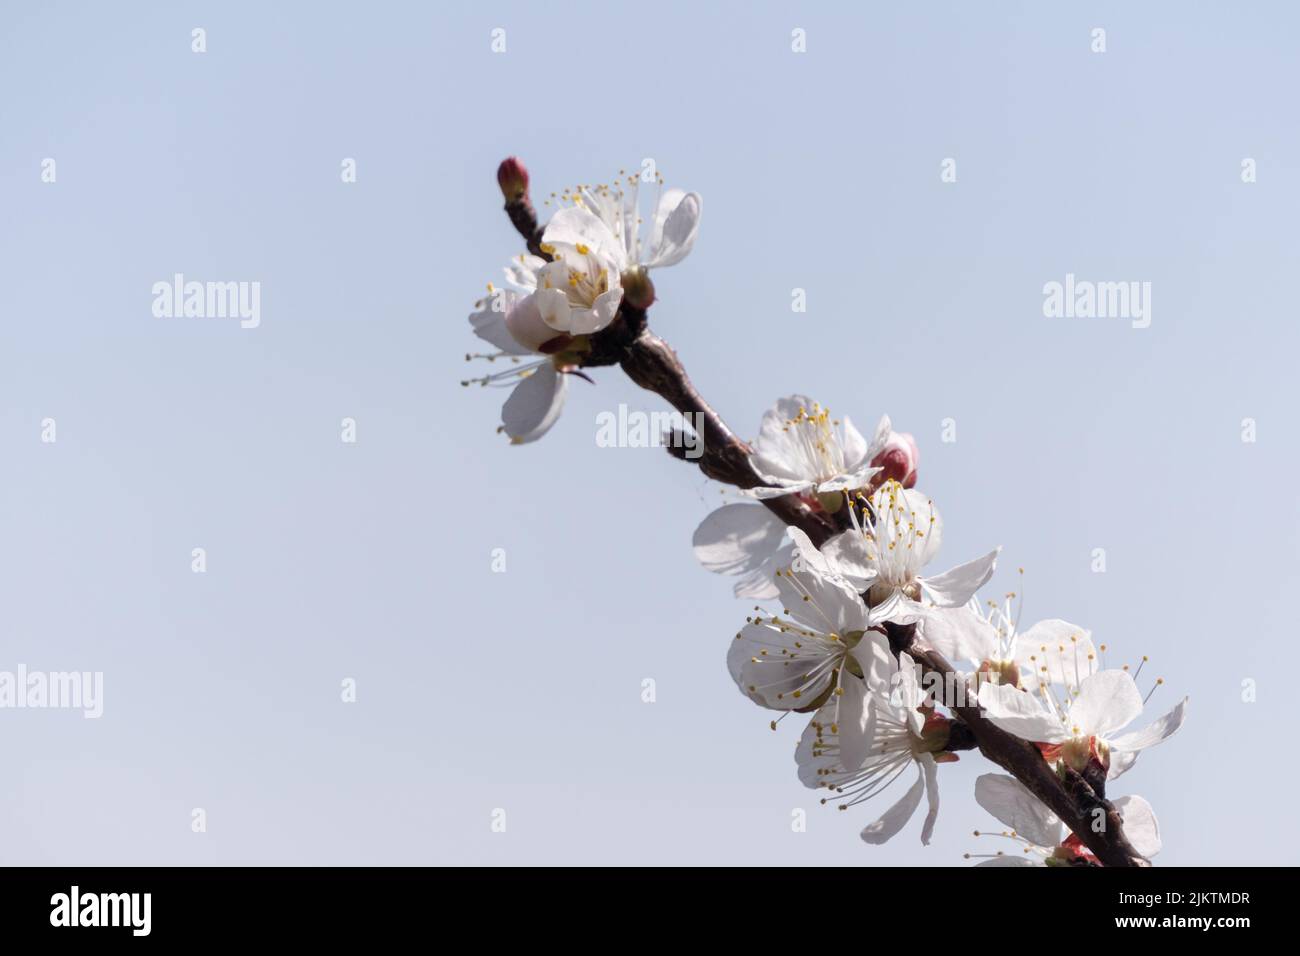 A closeup of the branch of an apricot tree with white flowers against the sky. Stock Photo